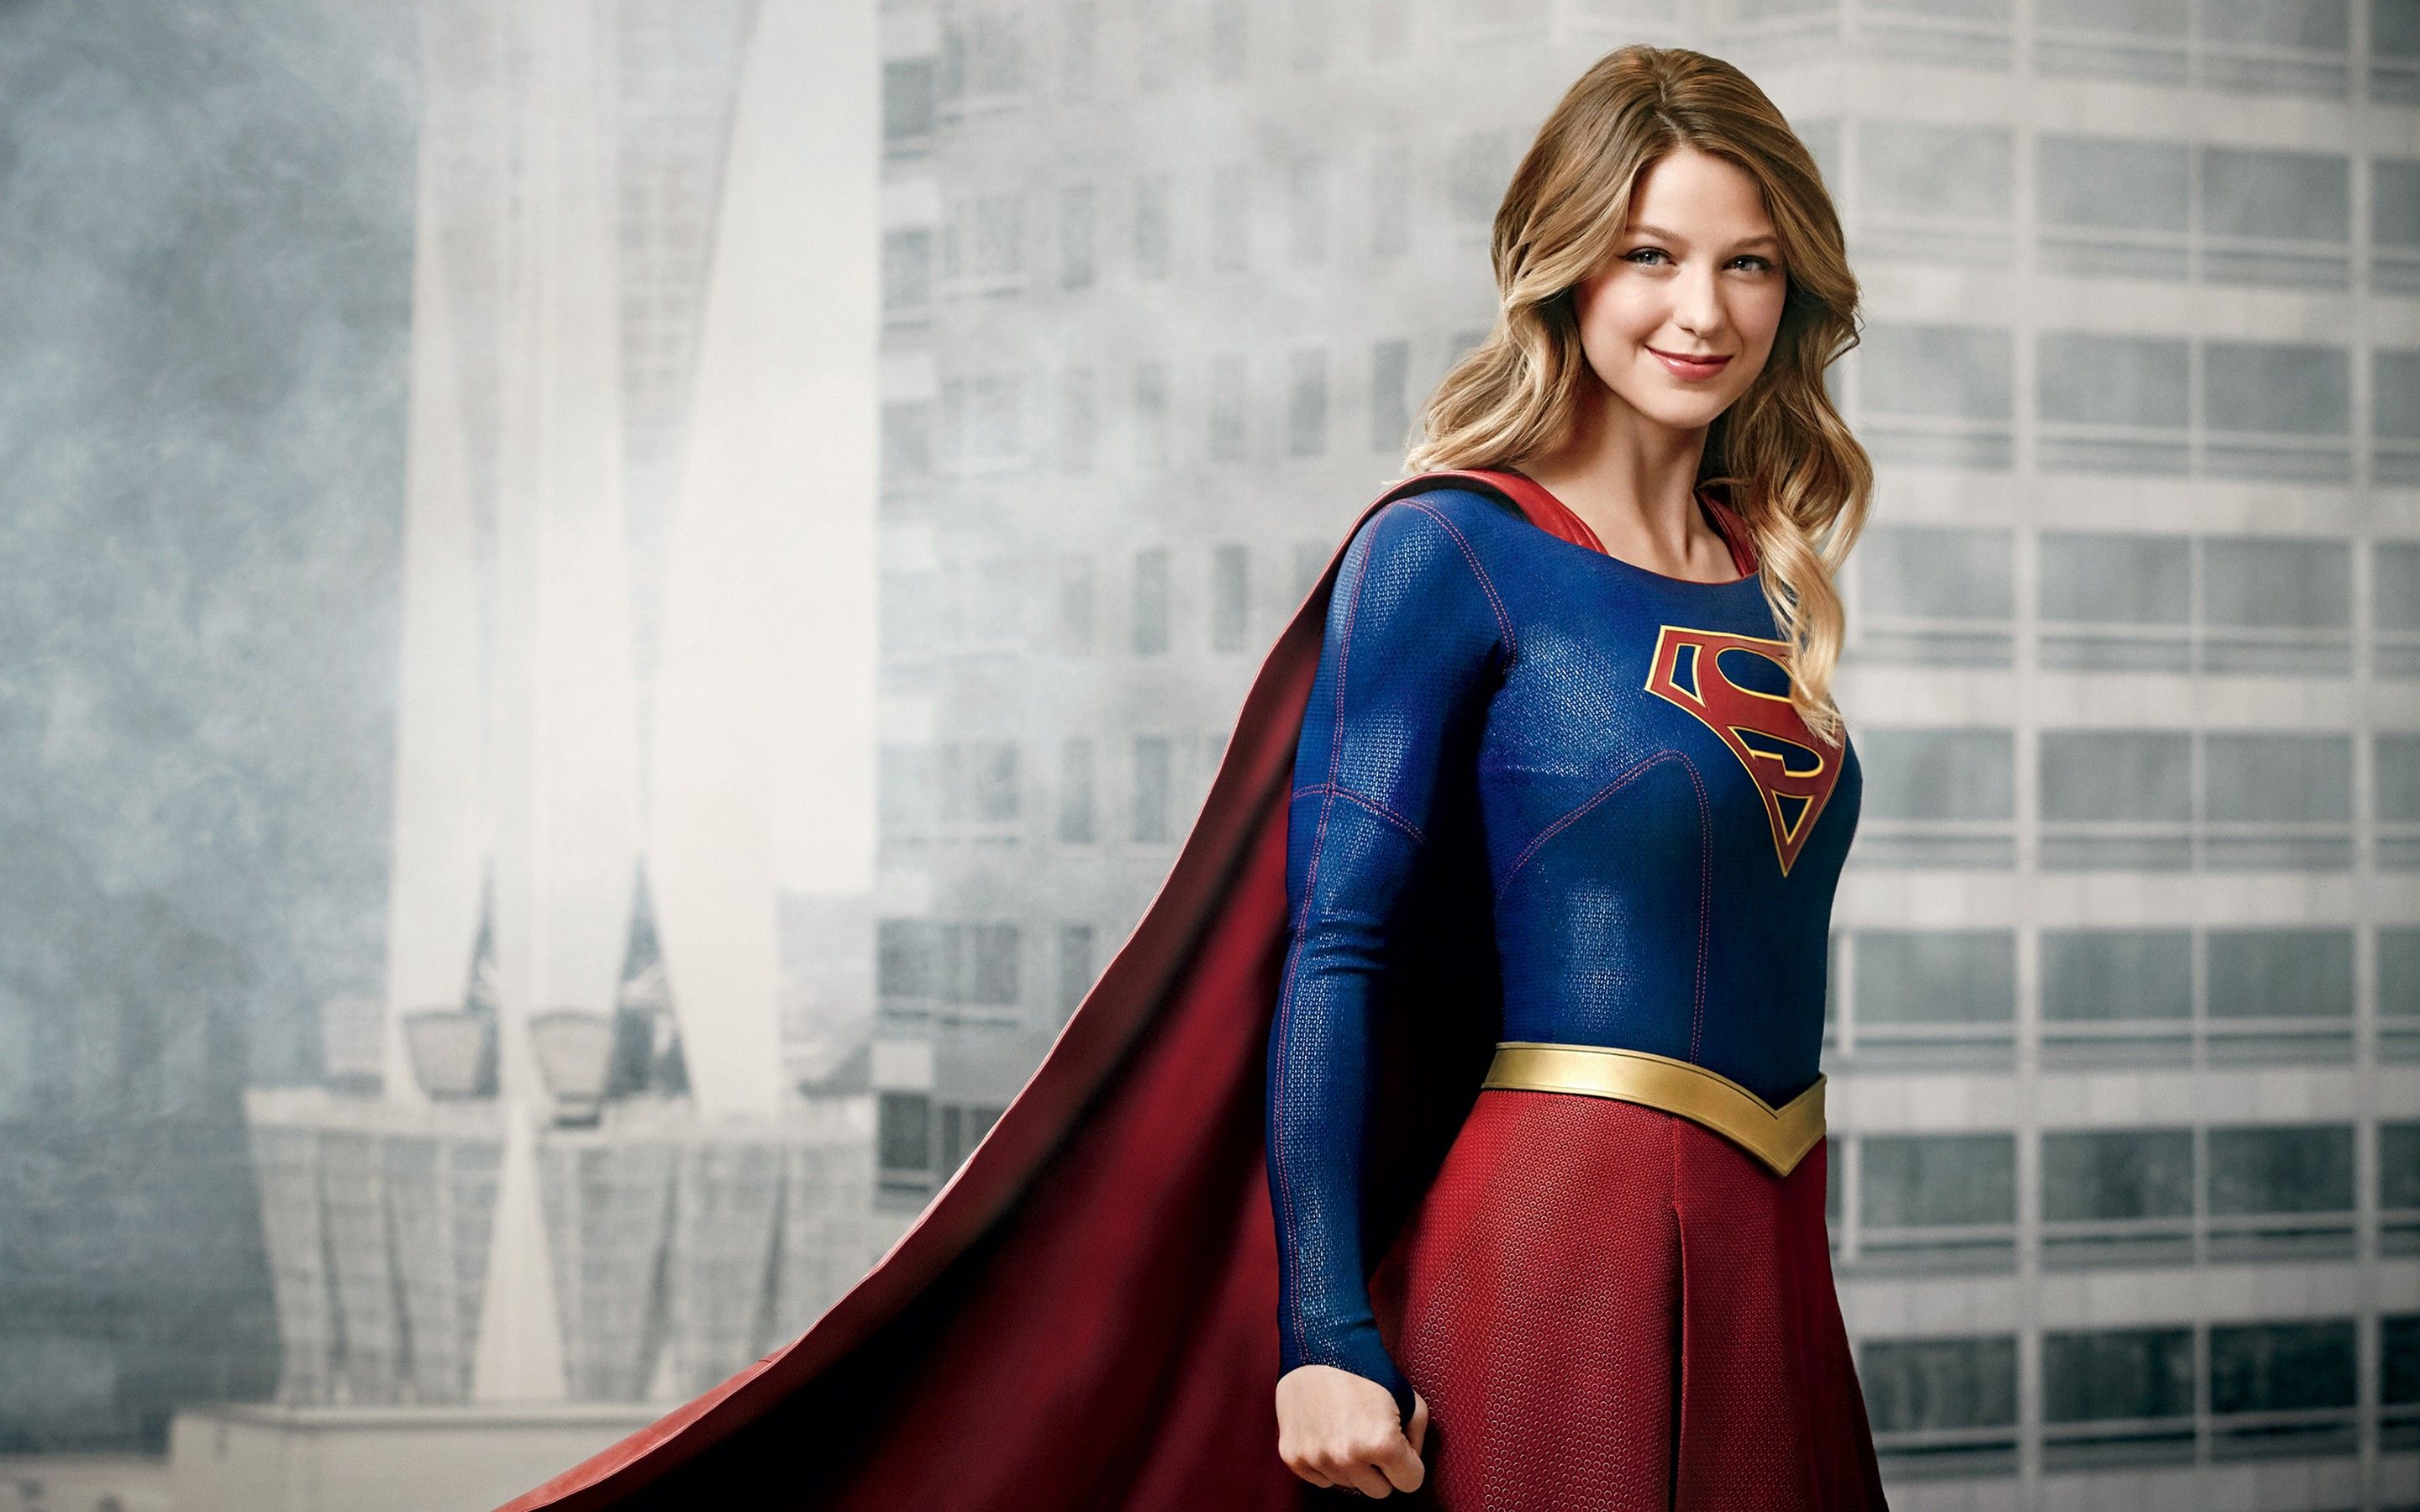 Supergirl 4K wallpaper for your desktop or mobile screen free and easy to download